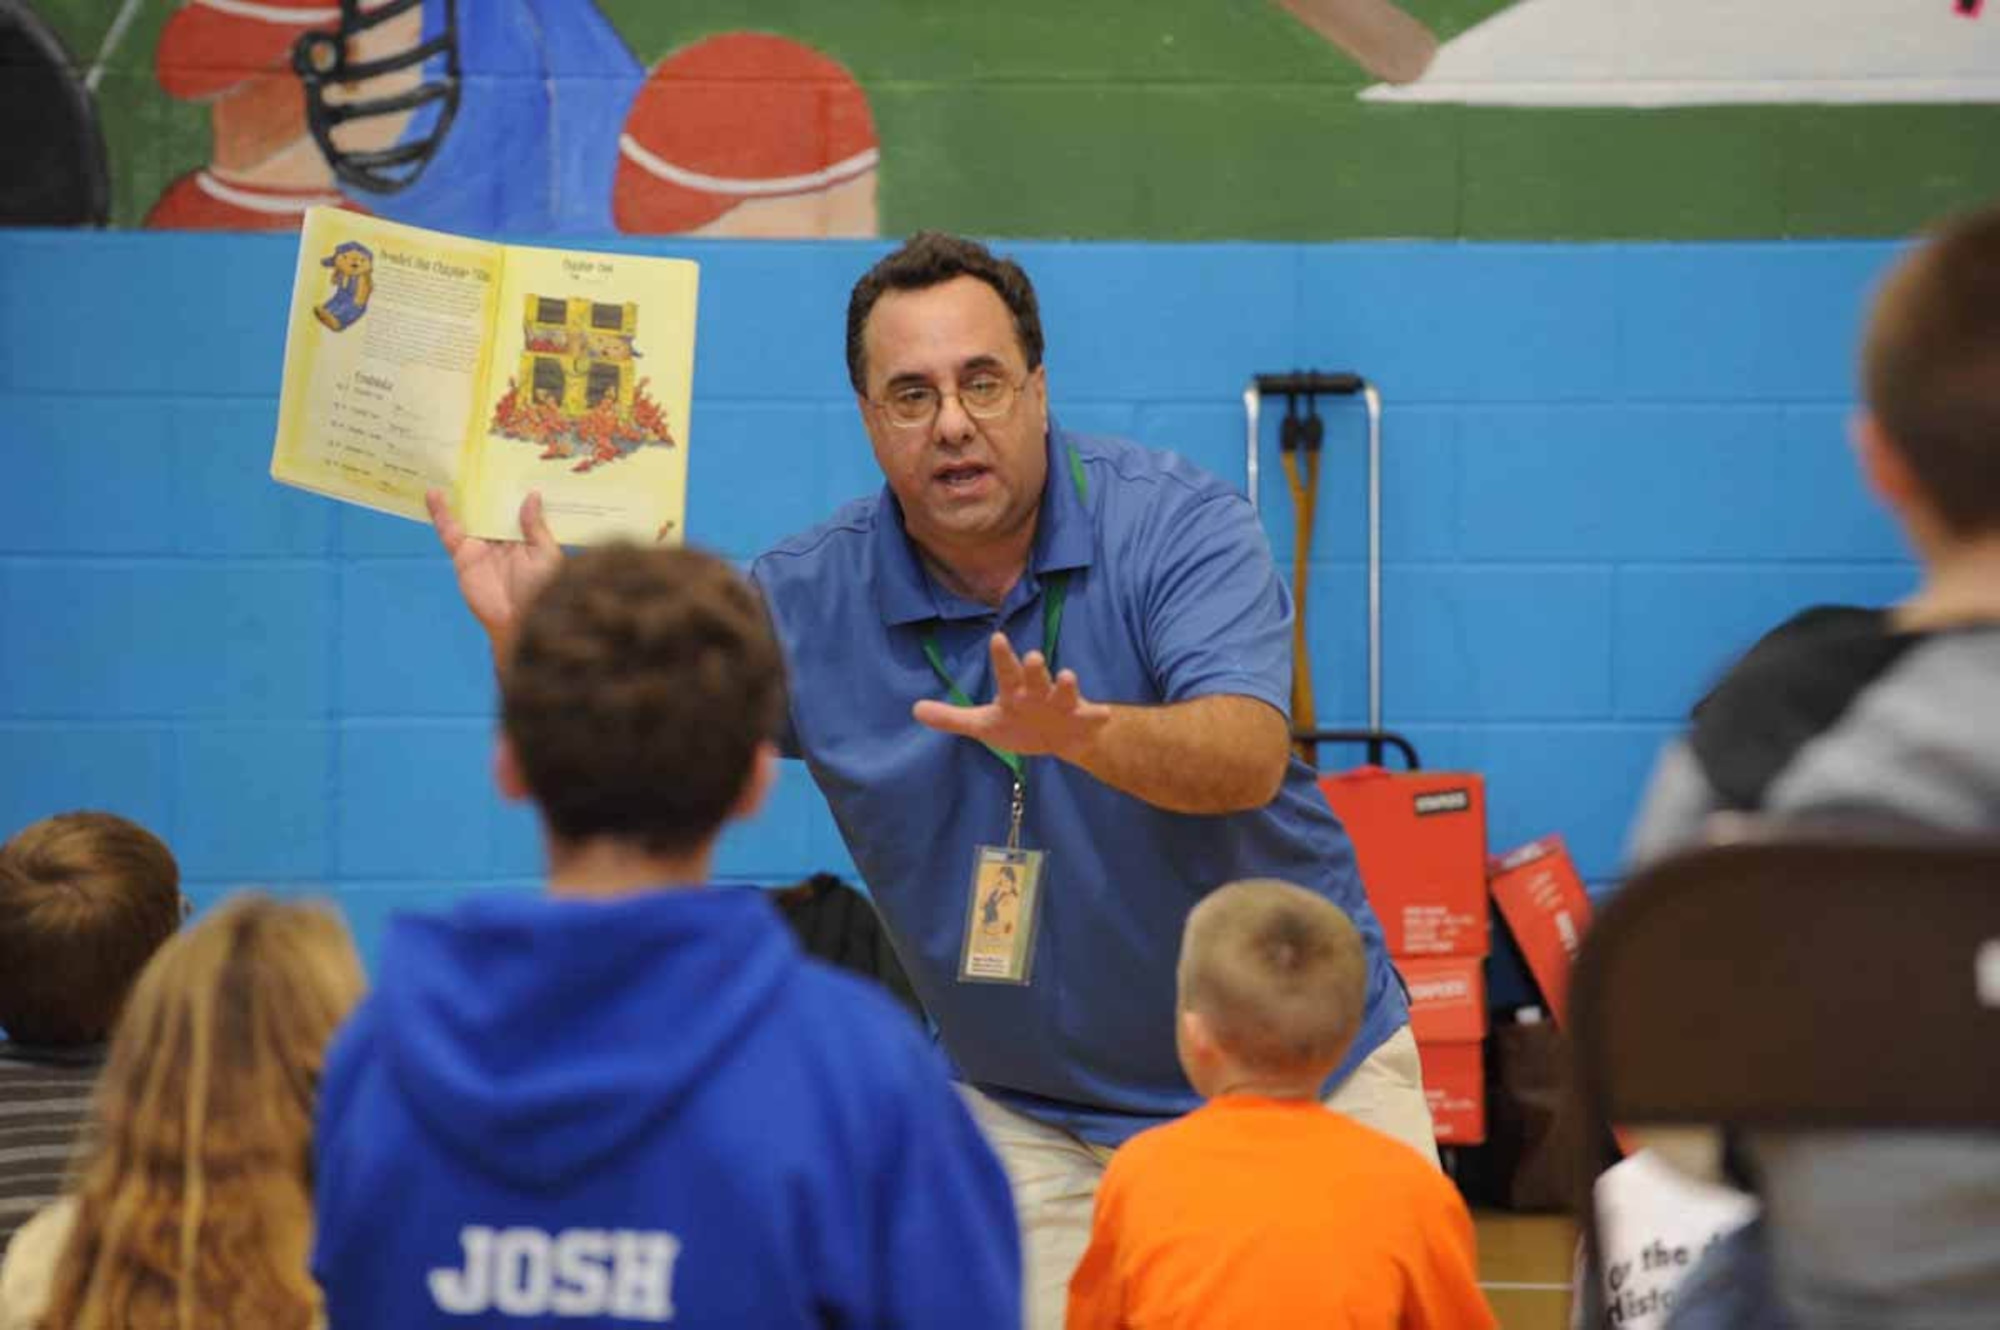 Sam Renick, author of the book, "It's A Habit, Sammy Rabbit!" visits Ellsworth to teach children how to be financially responsible here, Oct. 30. Mr. Renick sang songs, told stories and discussed the importance of saving money. (U.S. Air Force photo/Airman 1st Class Adam Grant)
